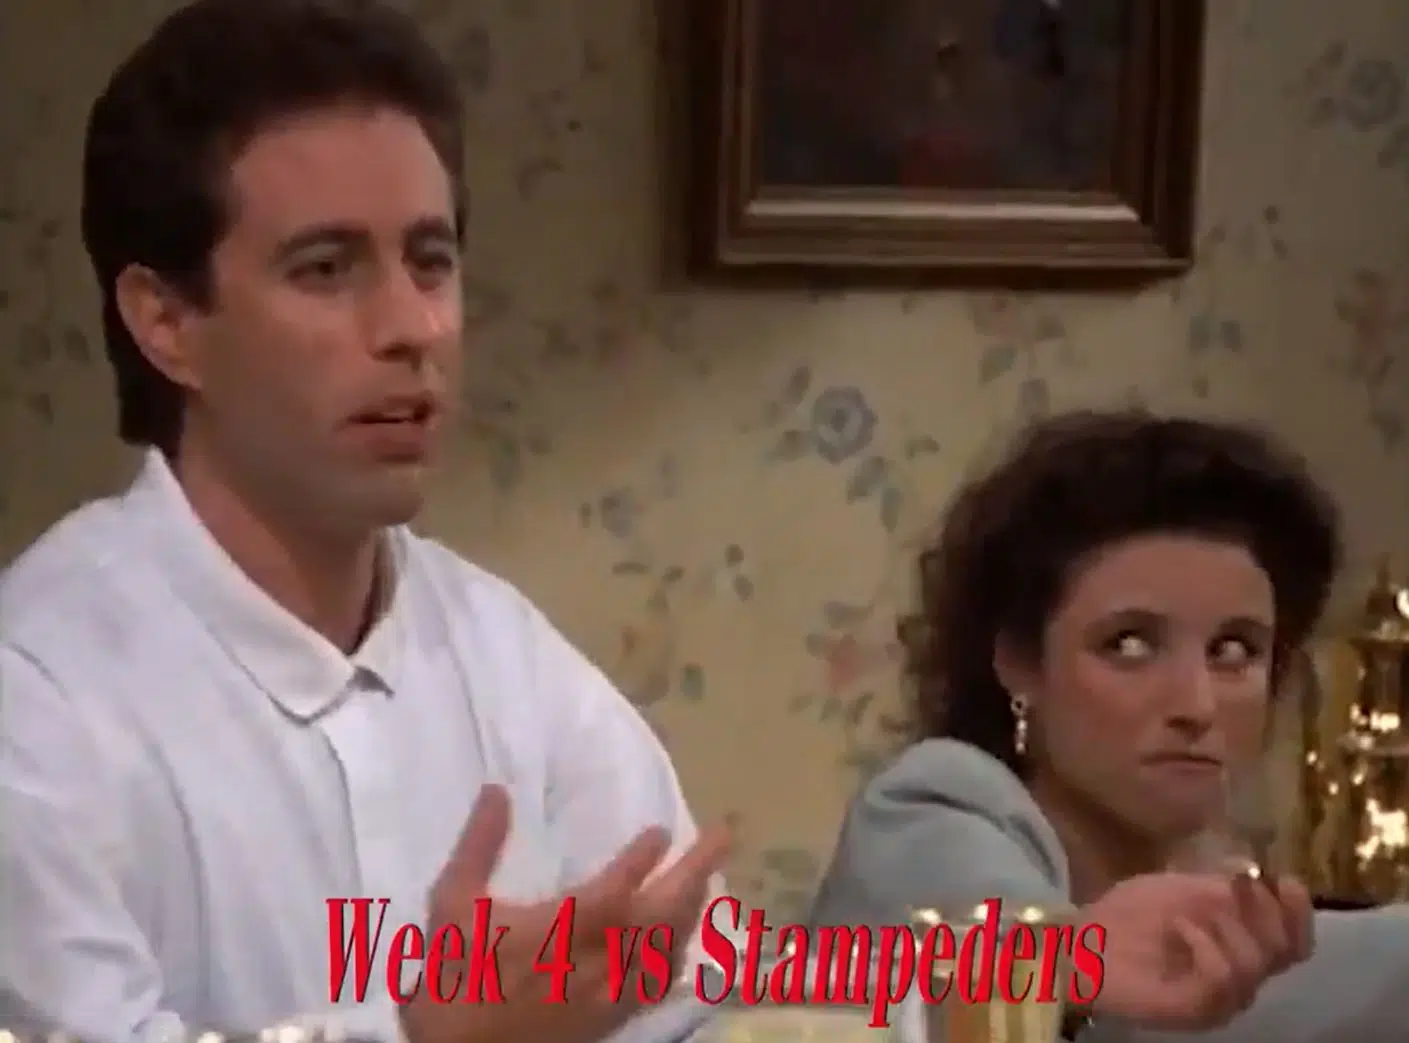 The Bombers 2021 Schedule, If It Was A Seinfeld Episode